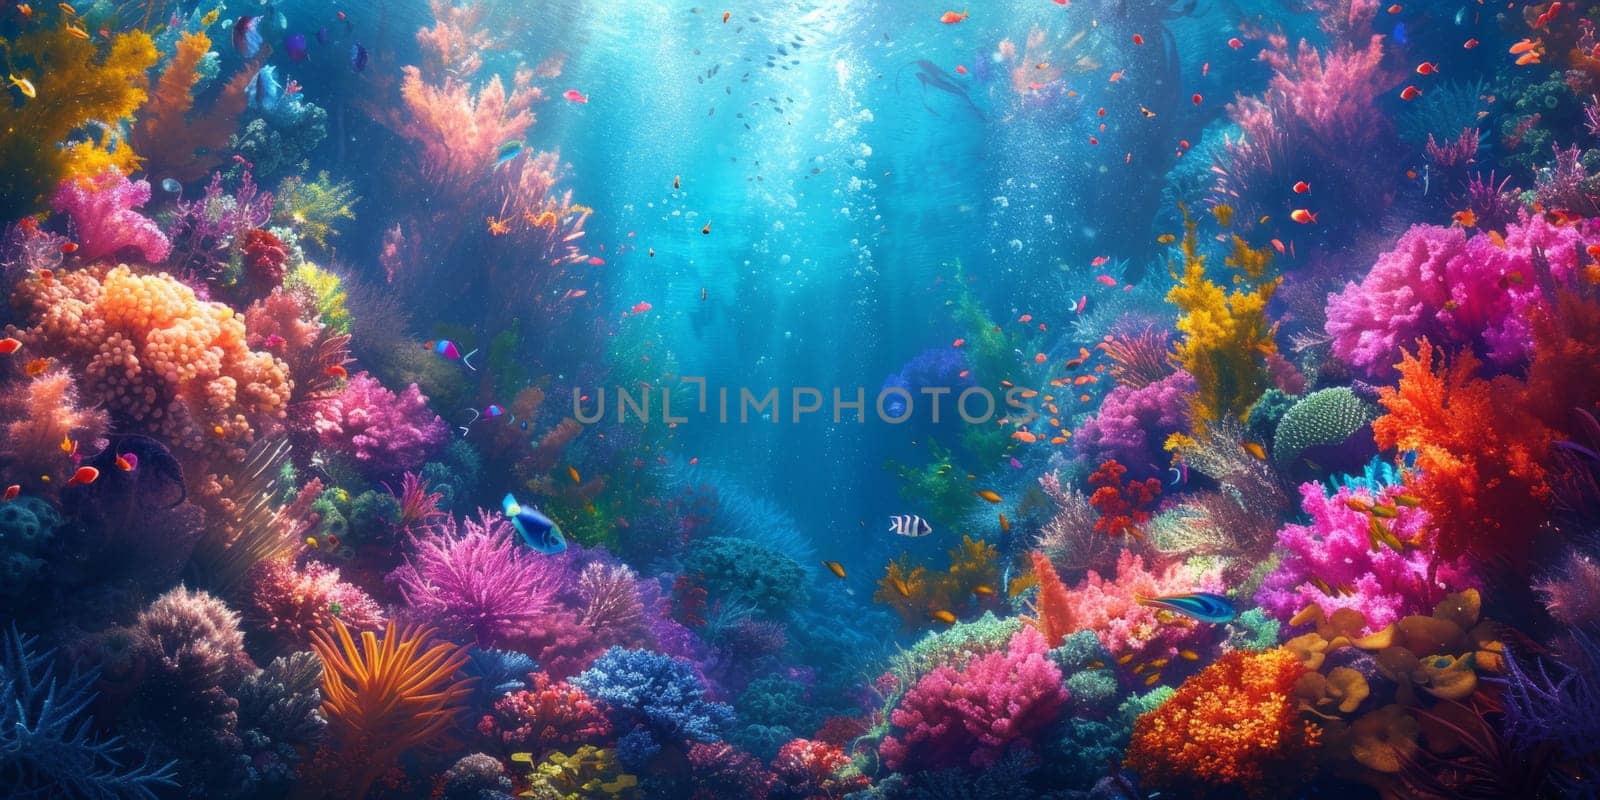 A colorful underwater scene with many different types of coral